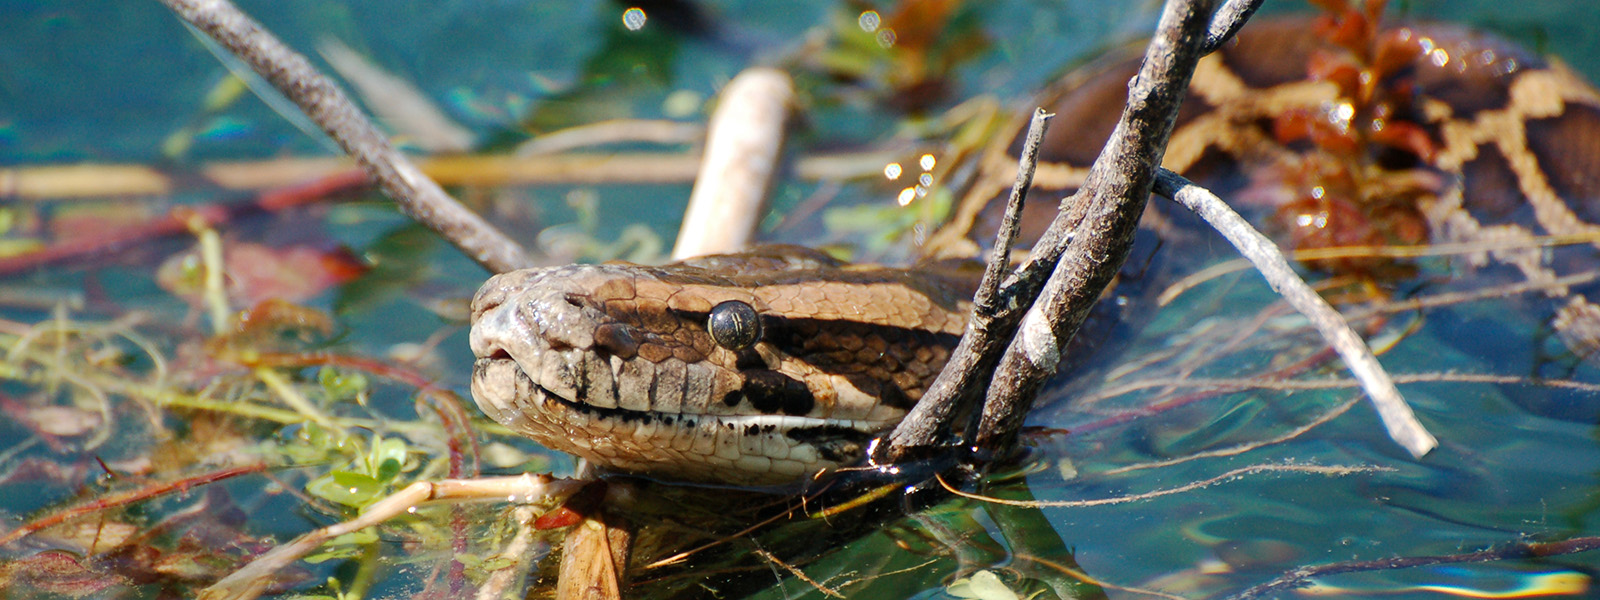 Photograph of a snake head sticking out of the water with some twigs around it.